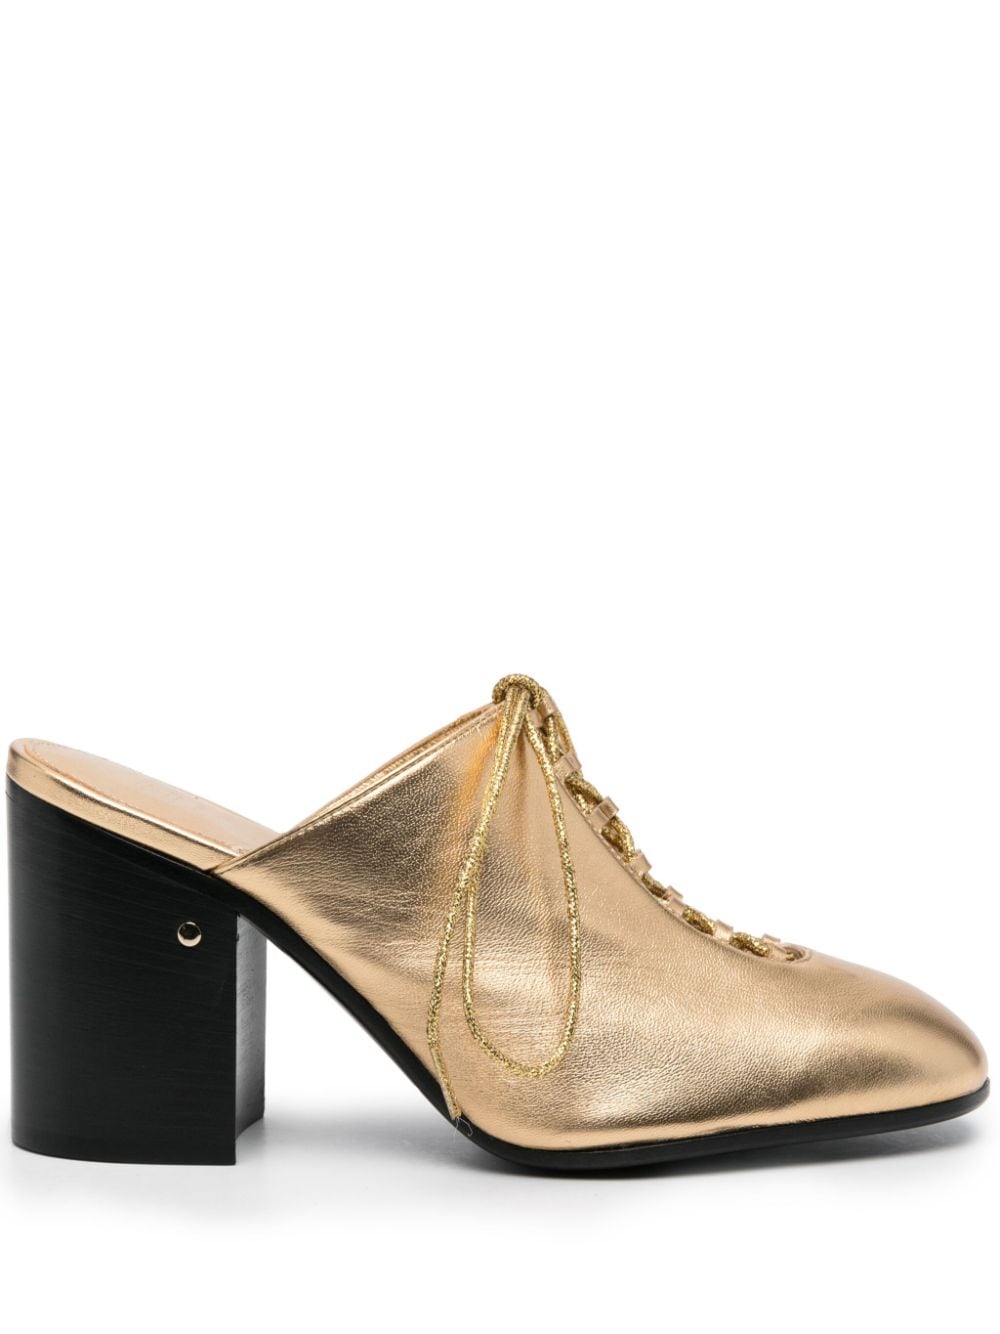 Laurence Dacade Jaimie 85mm leather mules - Gold von Laurence Dacade